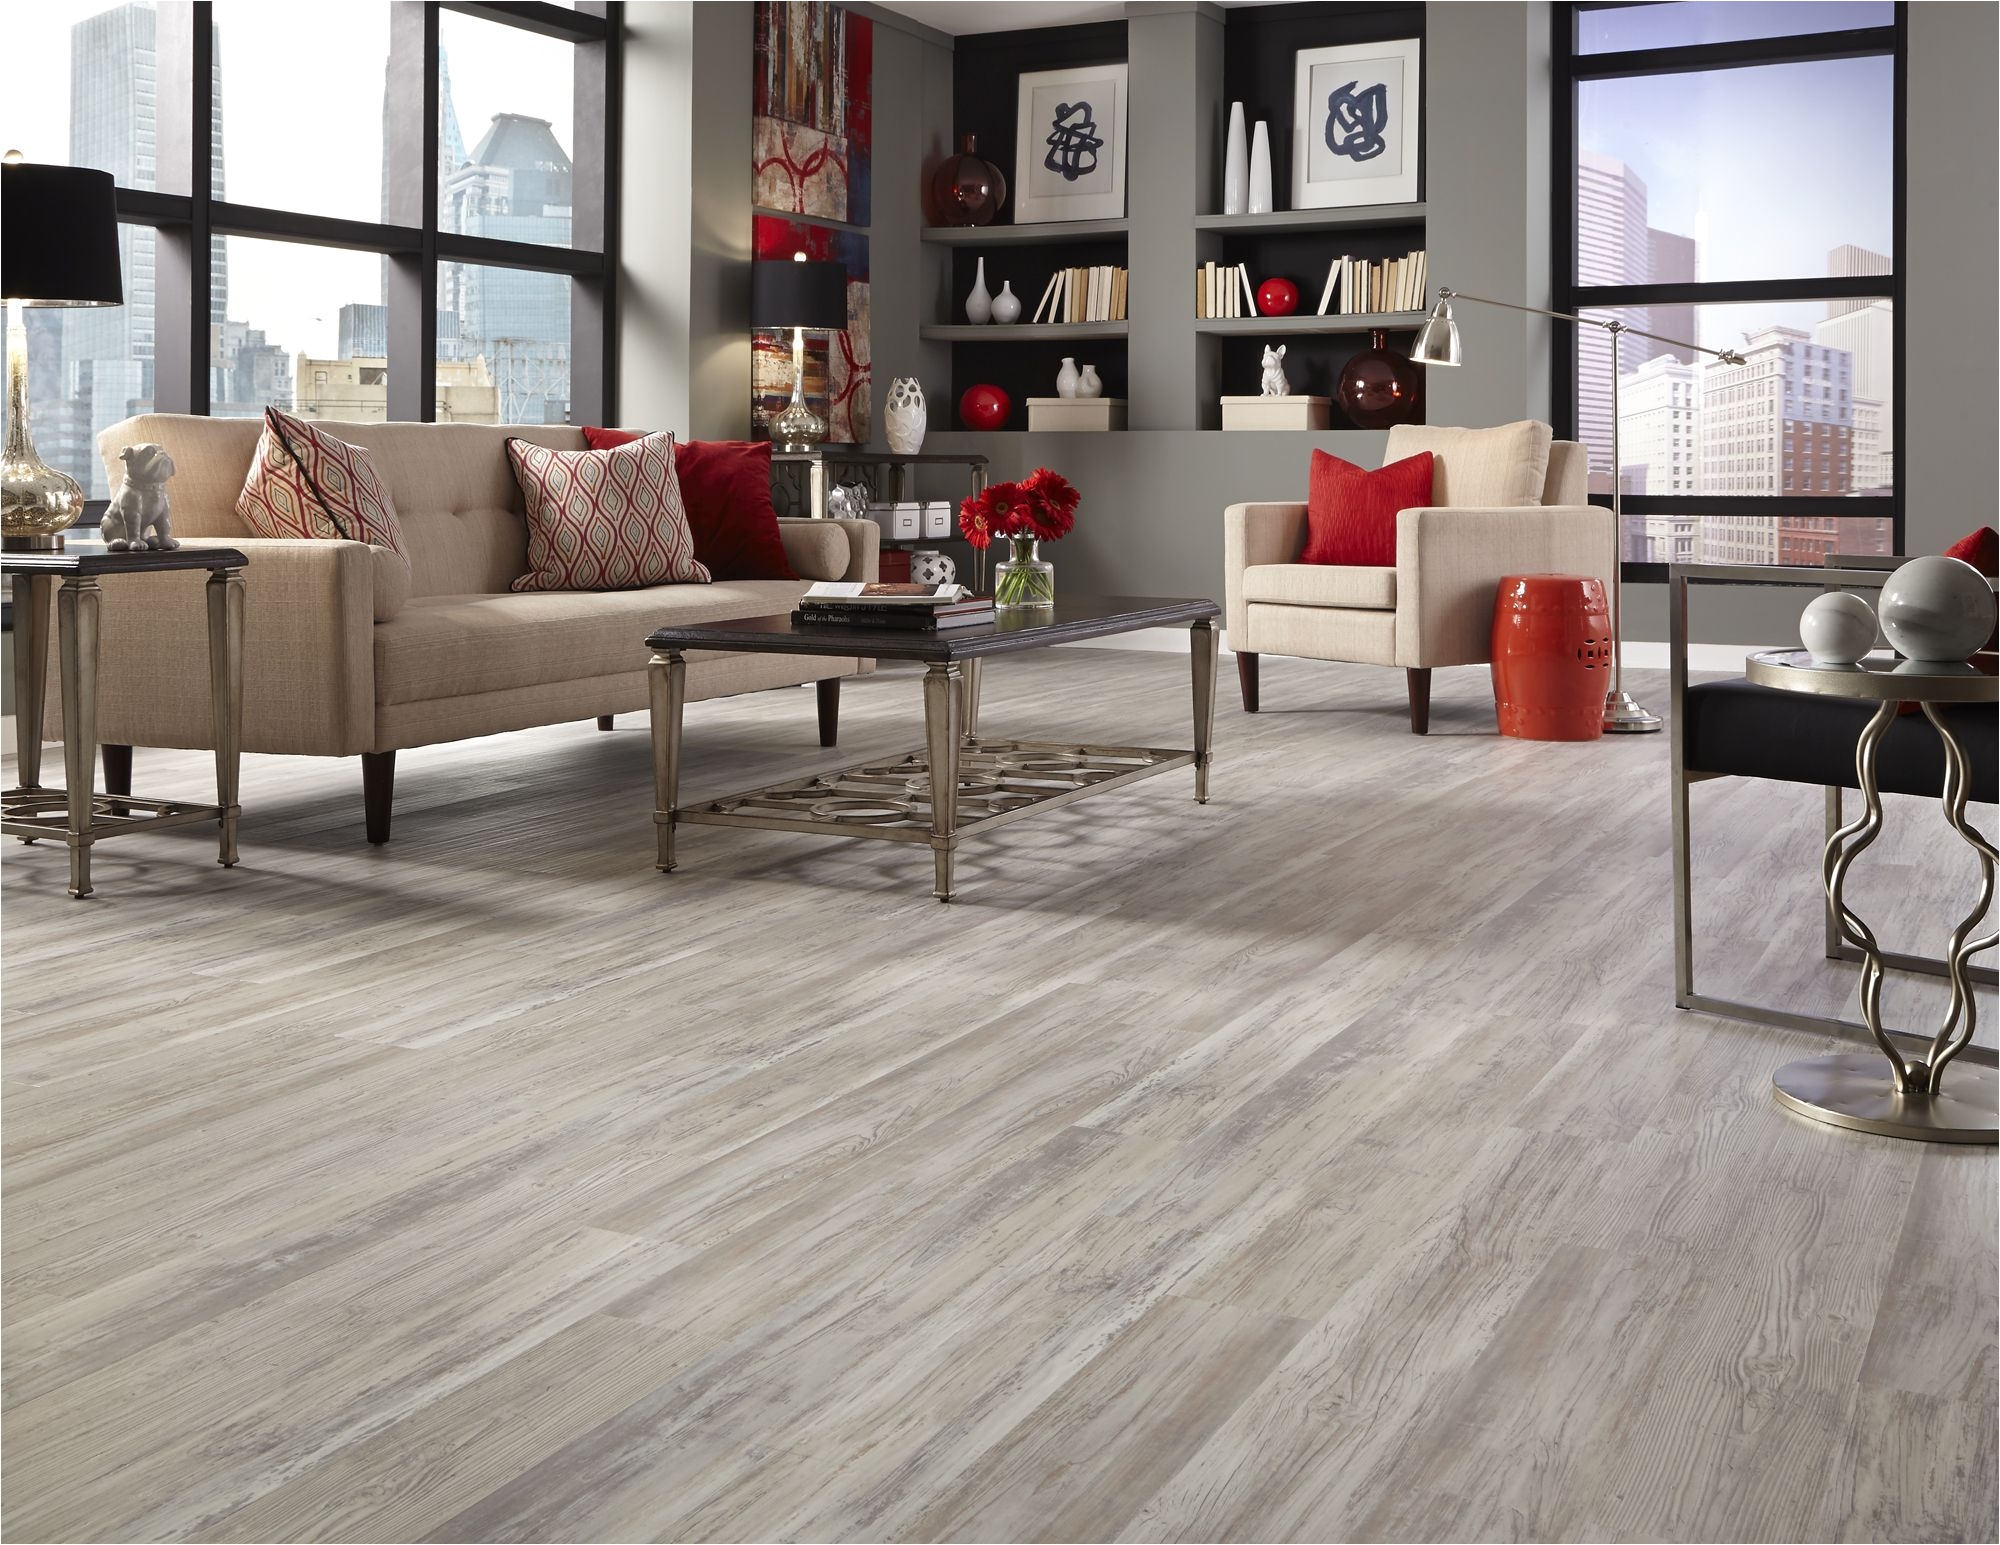 add casual charm to your home with affordable on trend grizzly bay oak waterproof lvp it features light airy creams tans grays for a stylish look